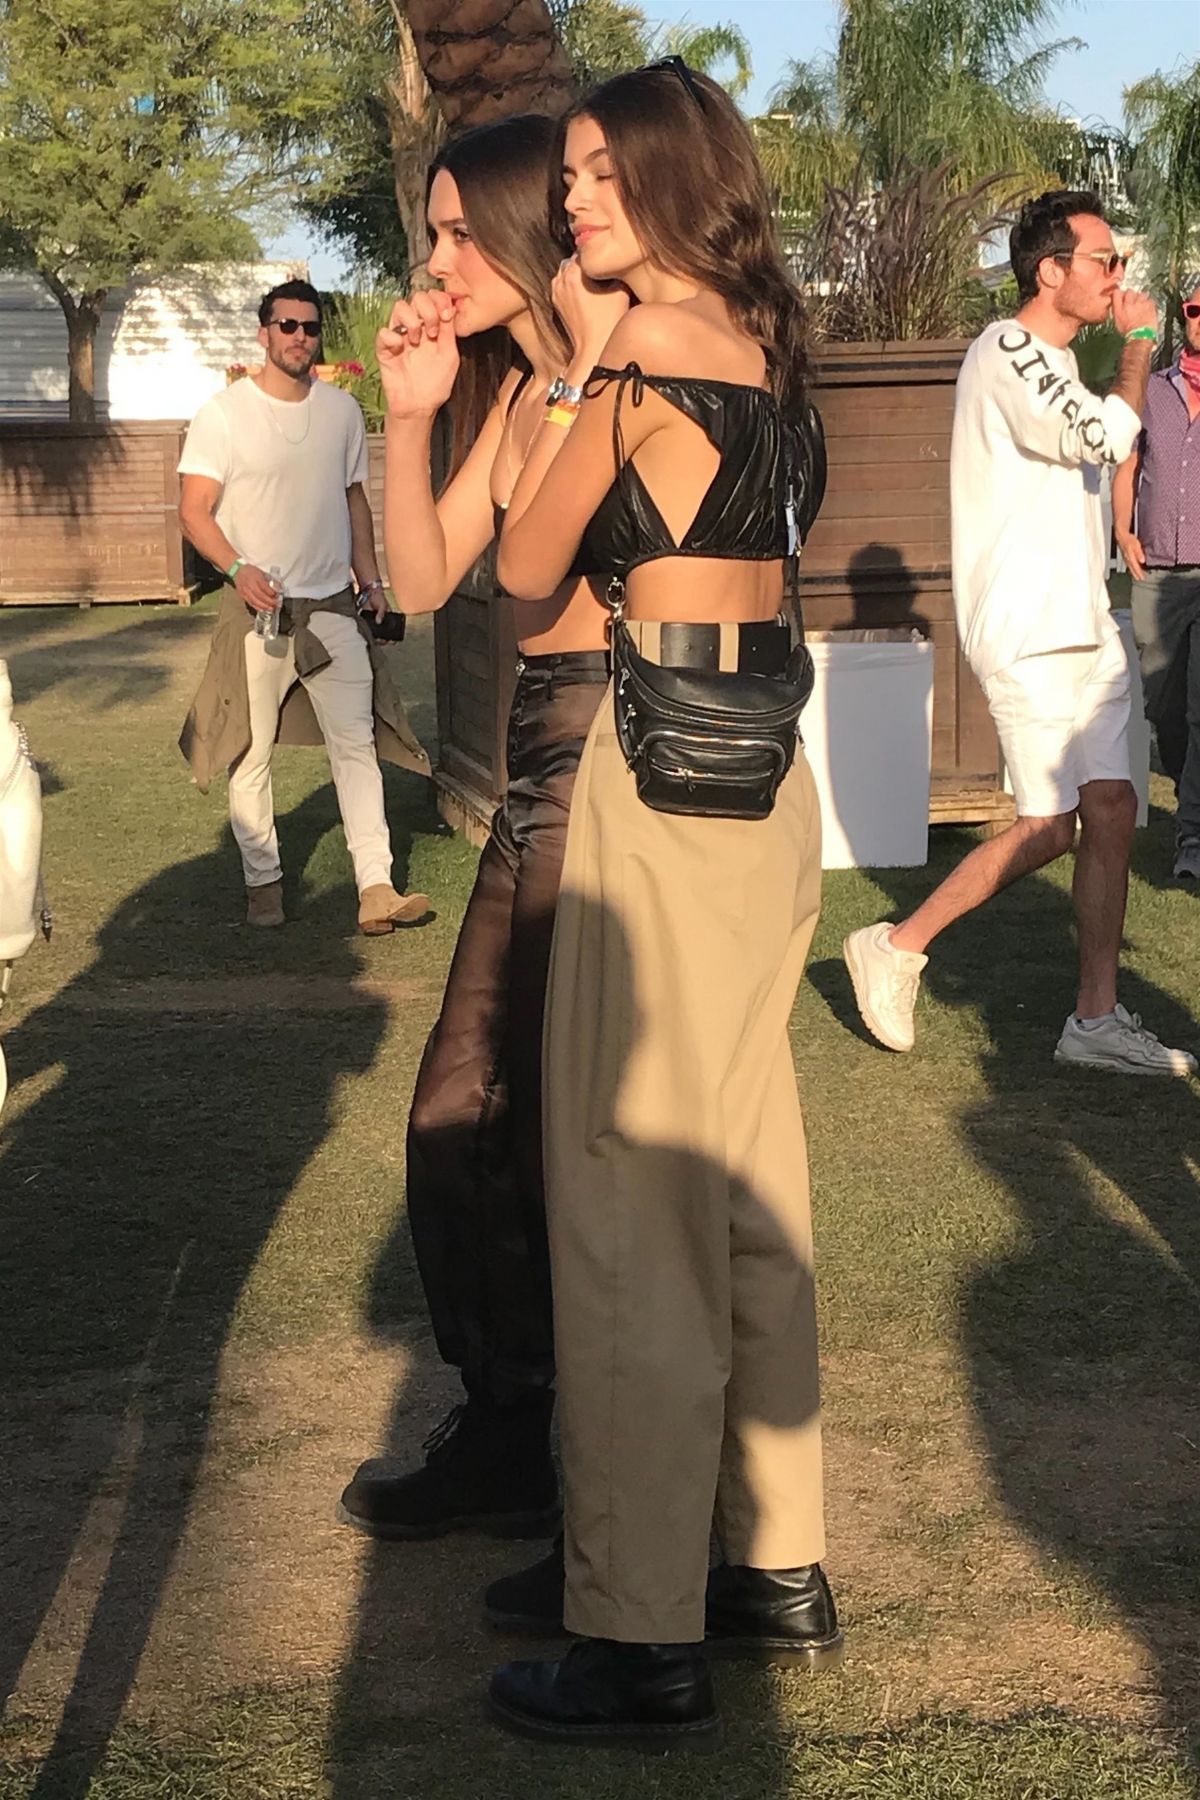 KAIA GERBER at Coachella Valley Music and Arts Festival in Palm Springs ...